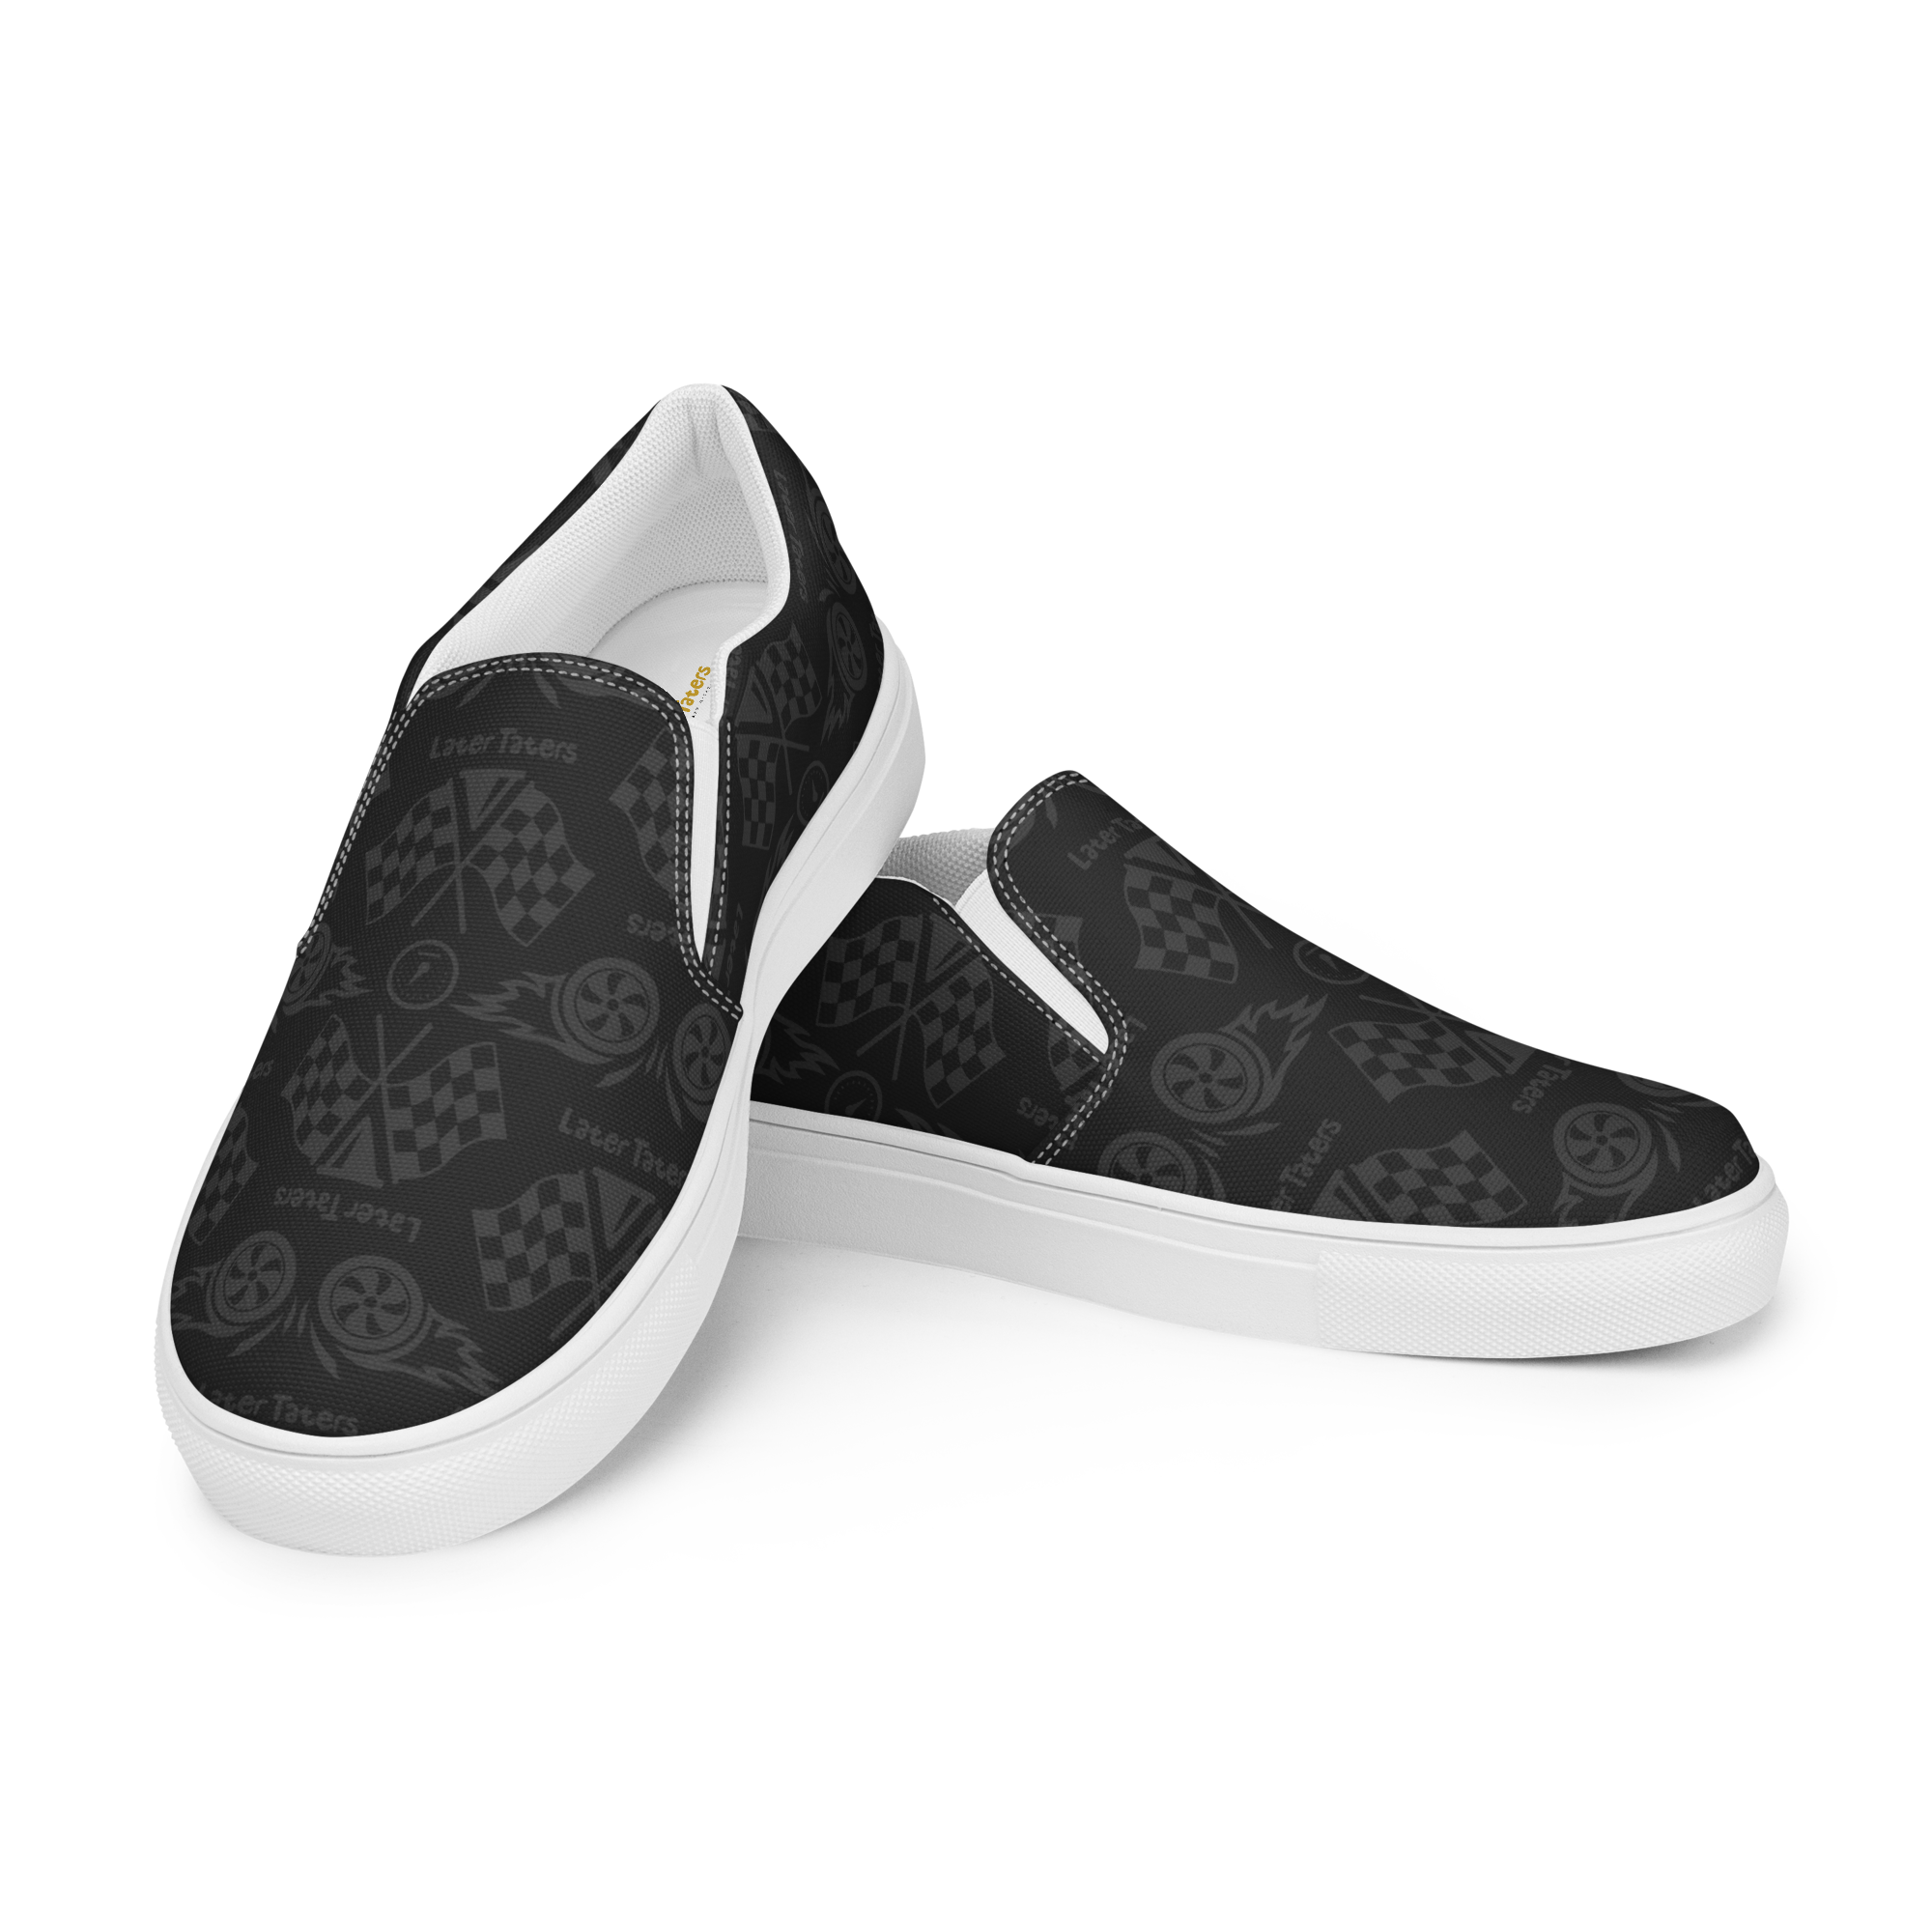 Later Tater's Men’s slip-on canvas shoes